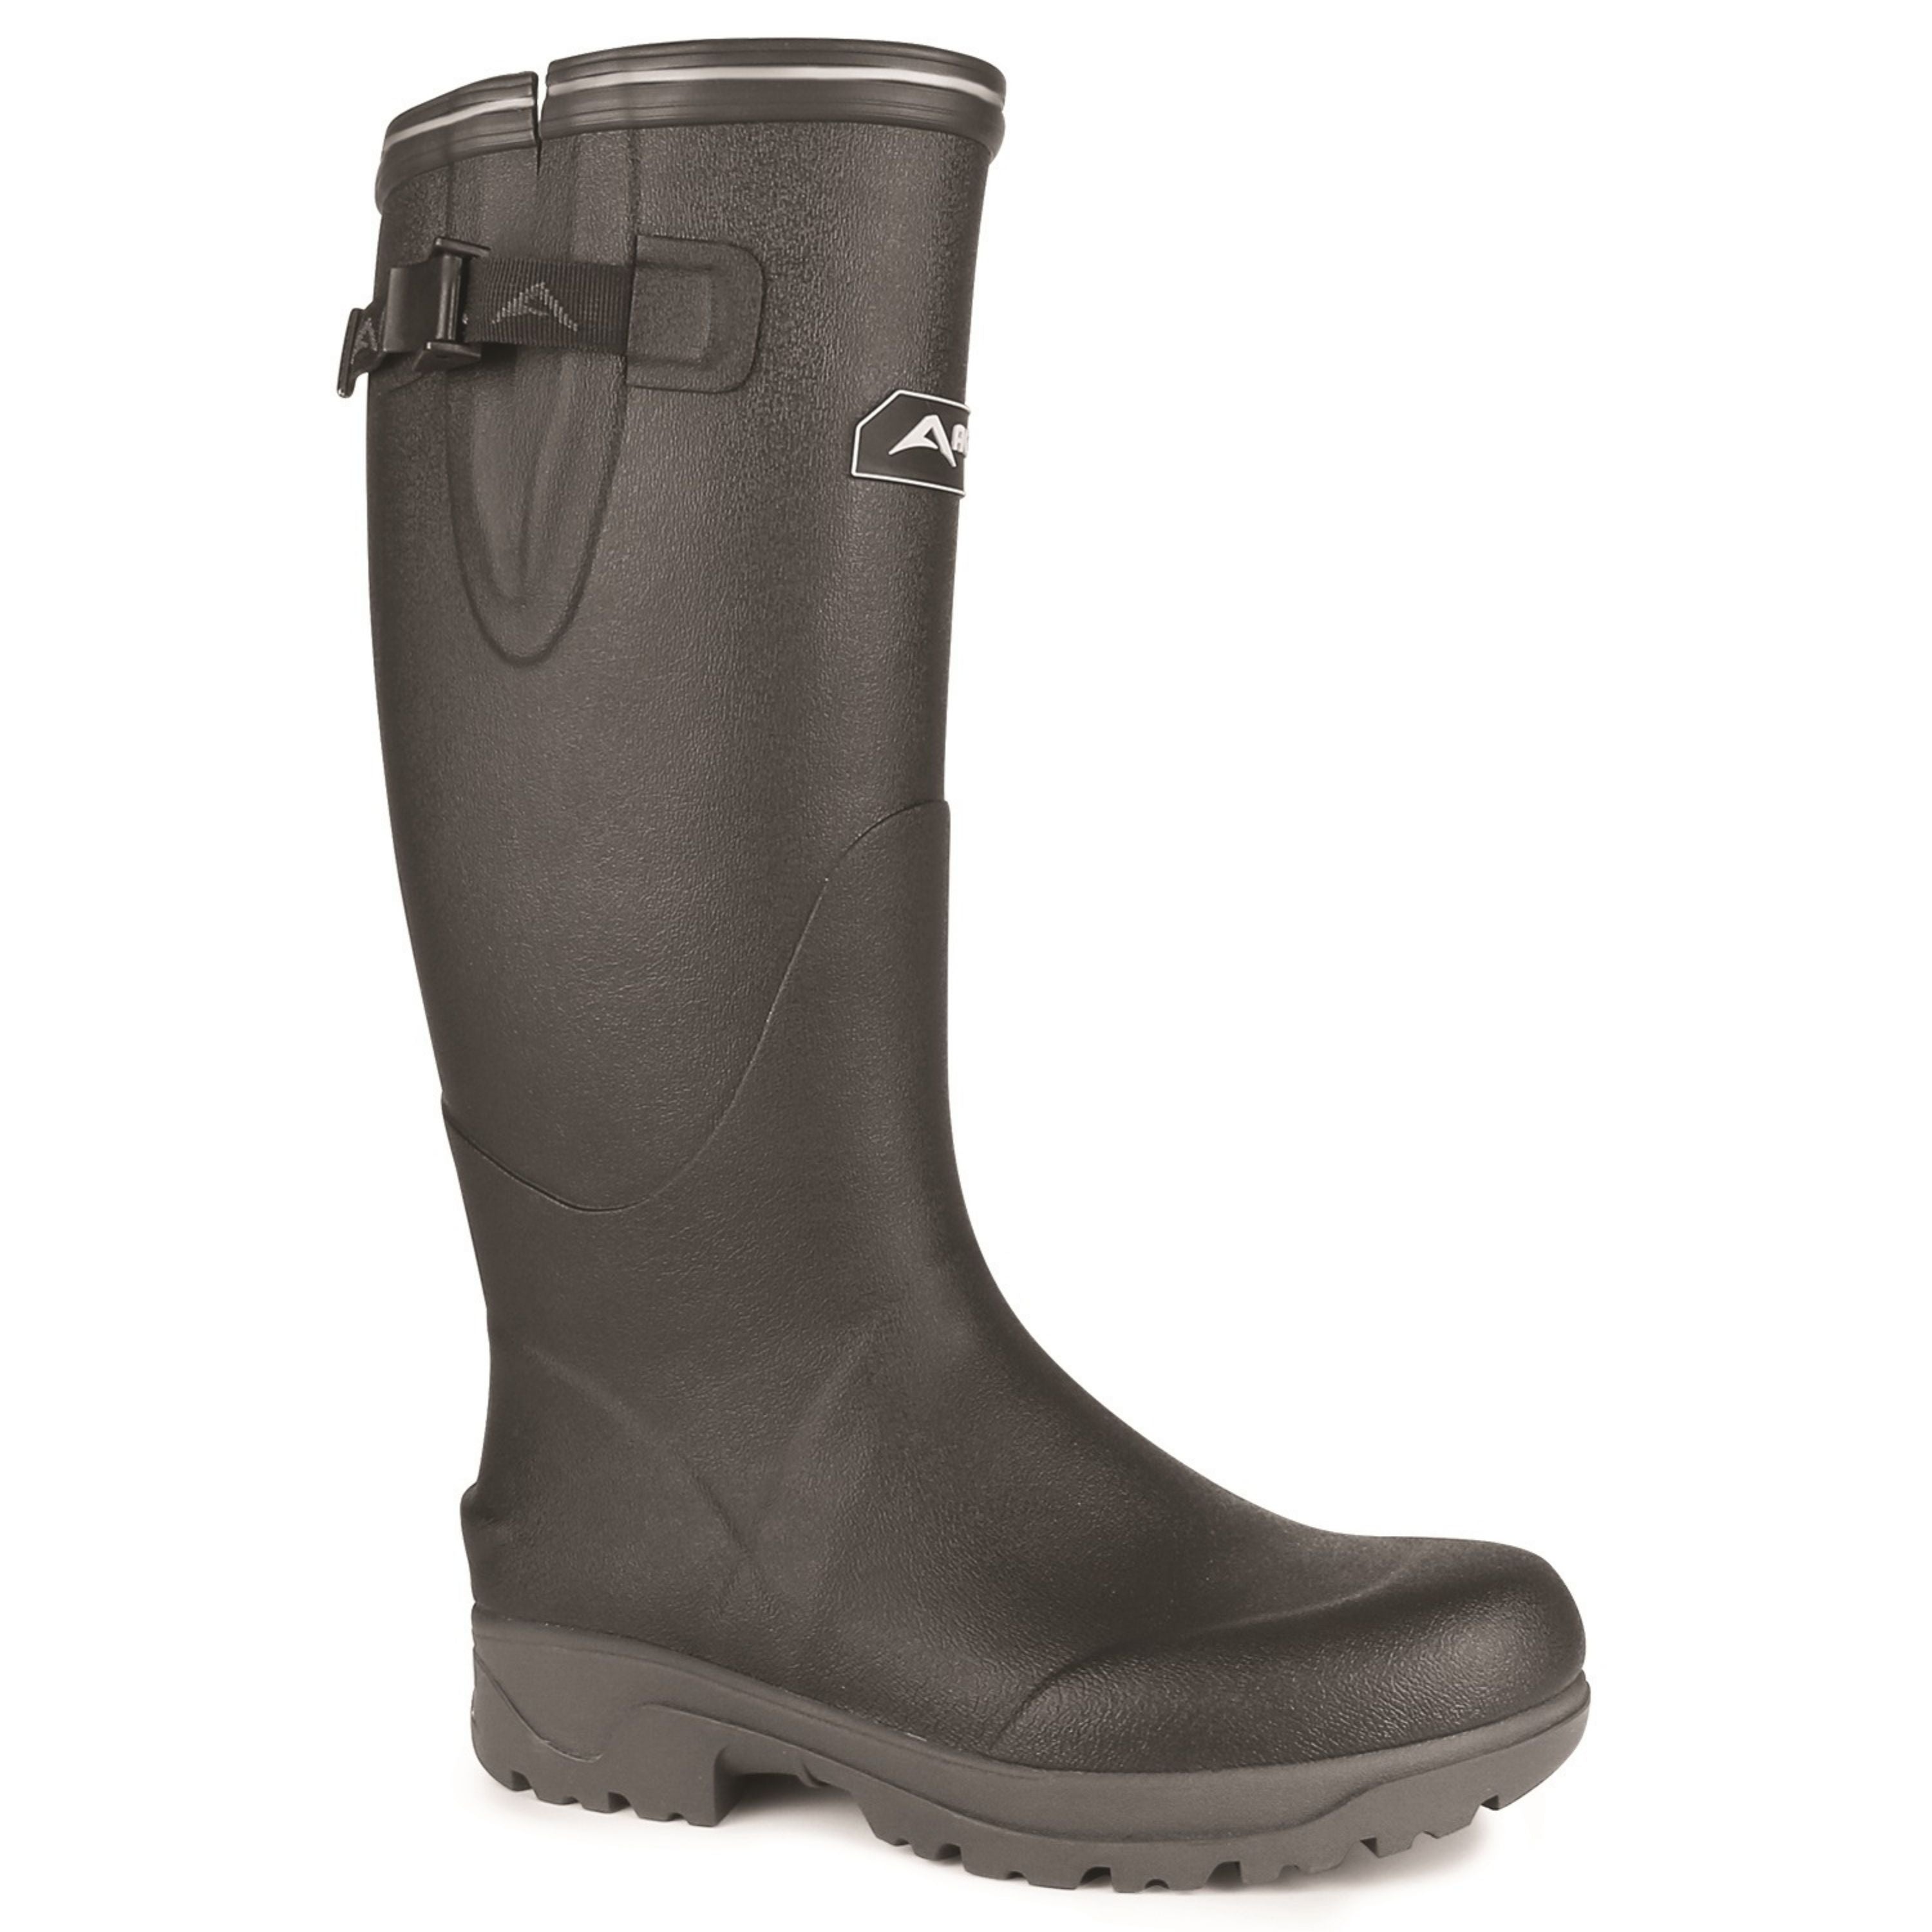 "Tackle" boots - Women's